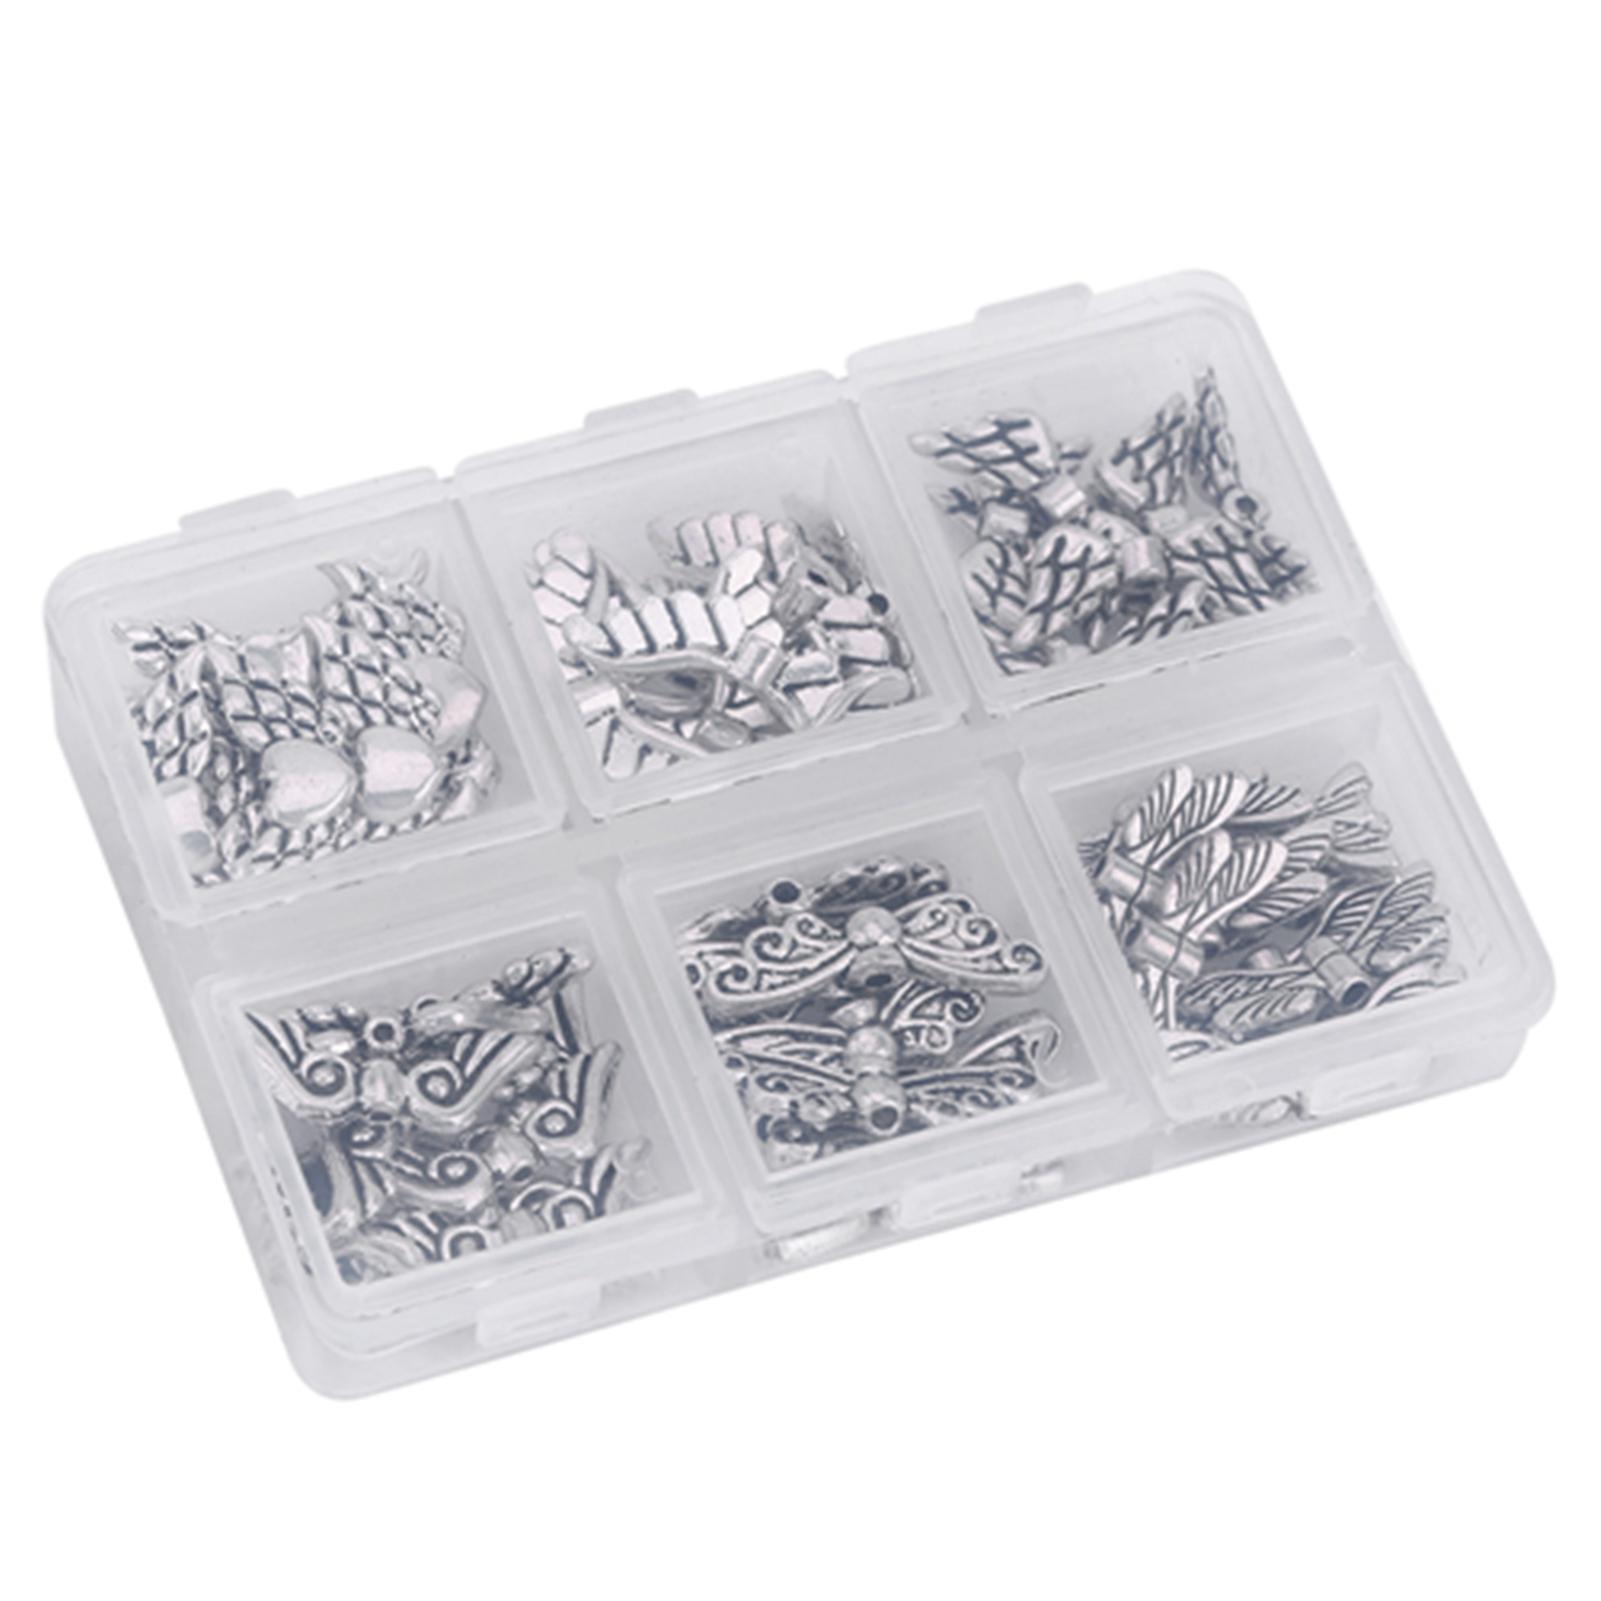 60pcs 14-26mm Angel Wing Beads Lot Diy Jewelry Findings Making Supplies With Storage Box